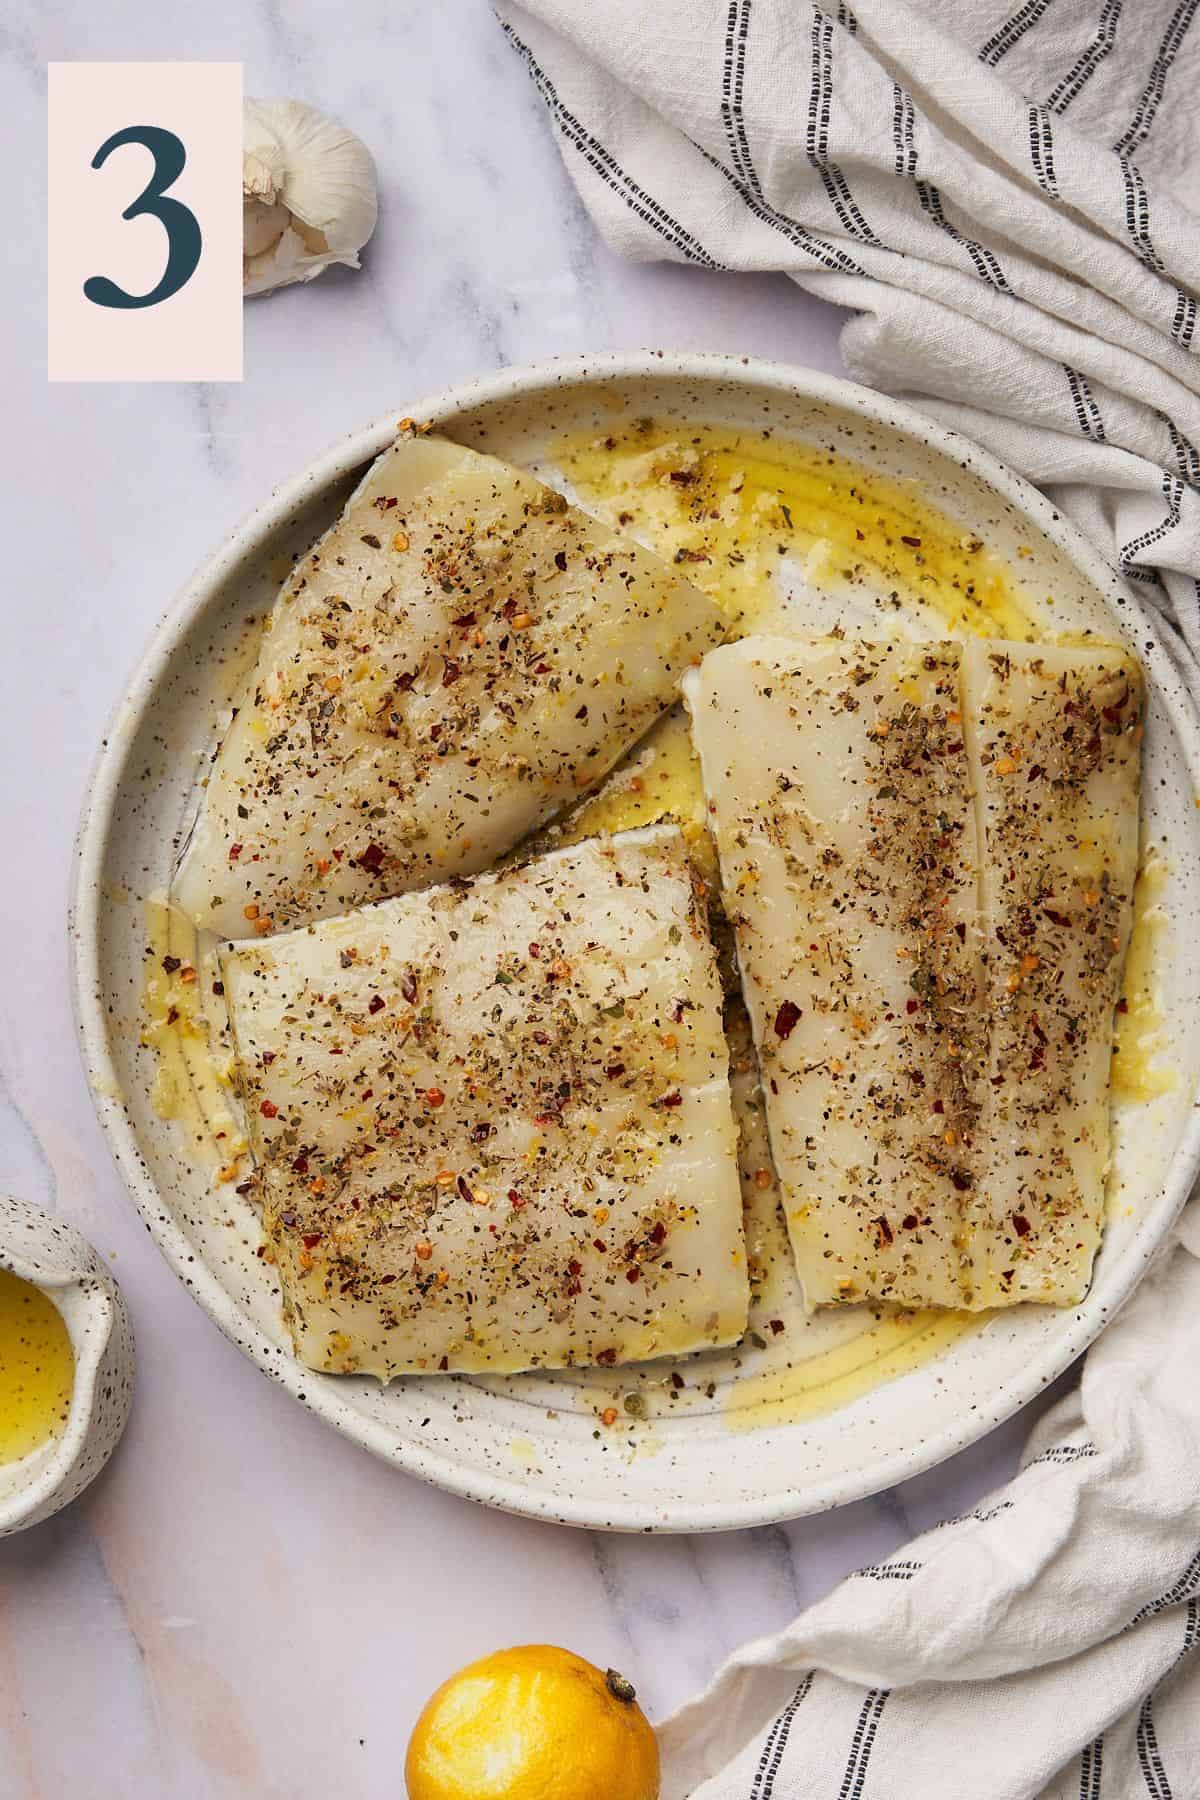 chilean sea bass fillets seasoned on a plate and drizzled with butter and olive oil. 